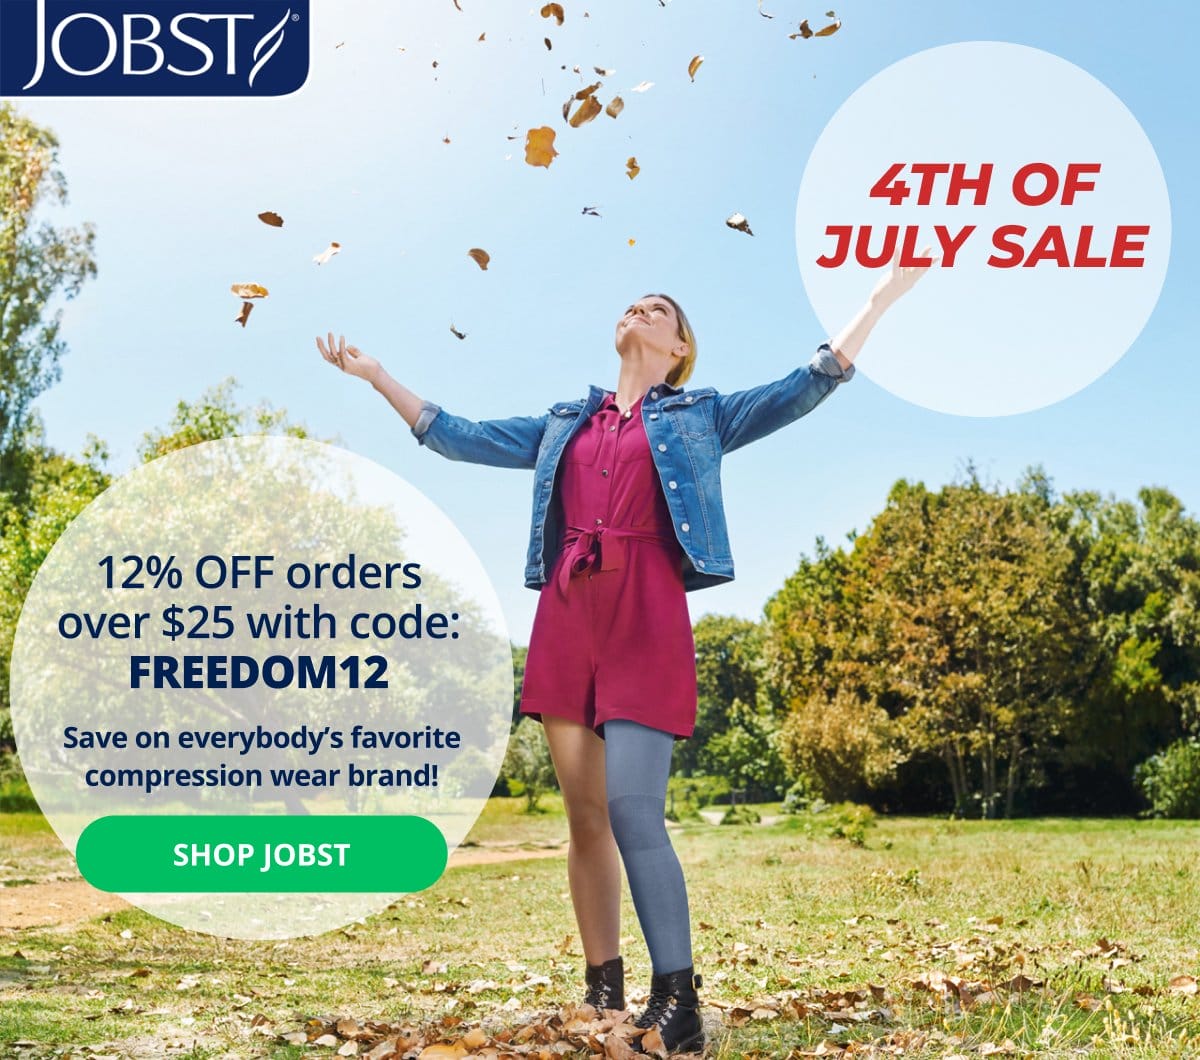 JOBST – 4th Of July Sale → 12% OFF orders over \\$25 with code: FREEDOM12 Save on everybody’s favorite compression wear brand! → SHOP JOBST